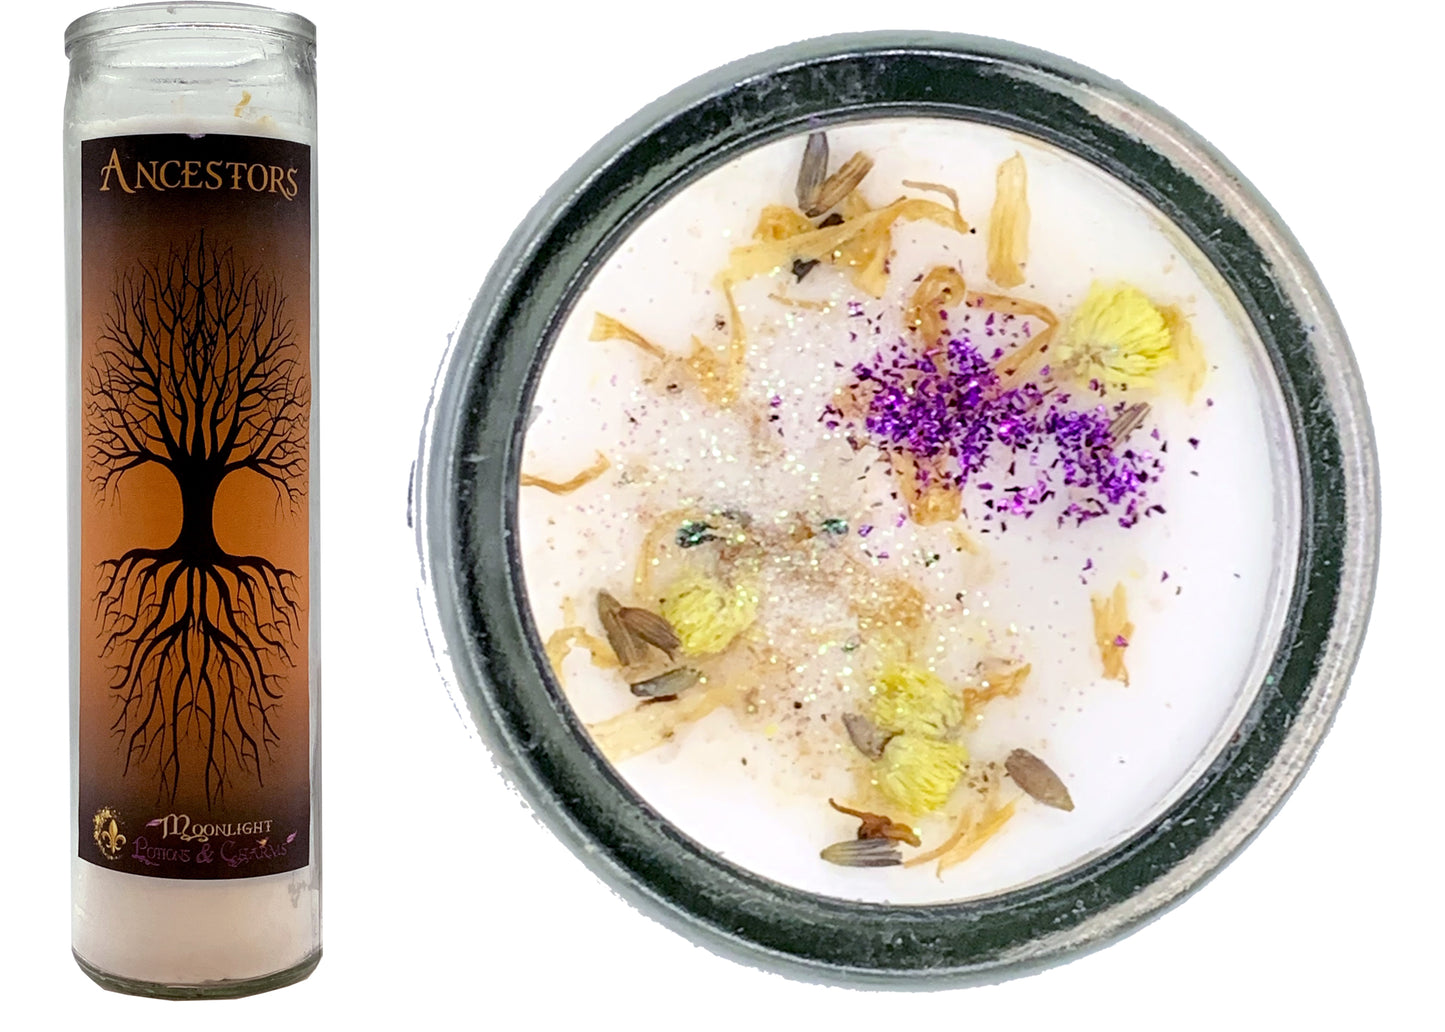 Ancestor Prayer Candle - Moonlight Potions & Charms